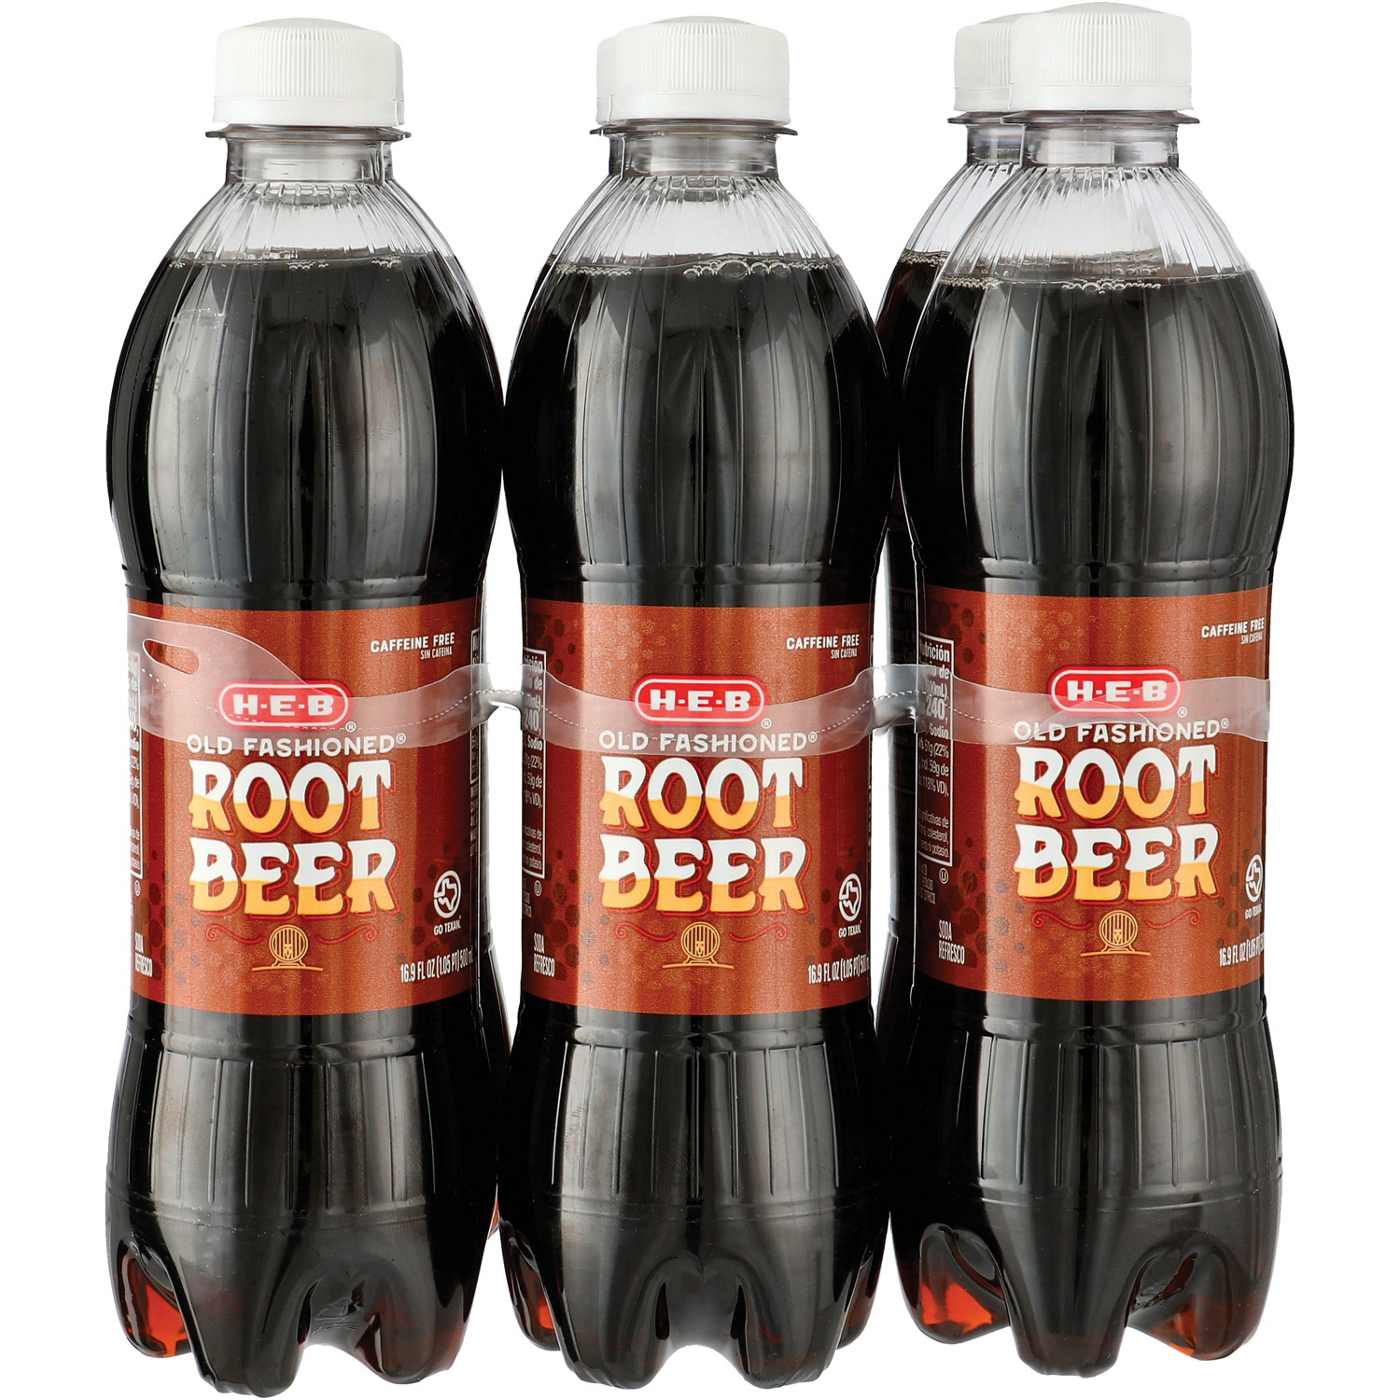 H-E-B Old Fashioned Root Beer Soda 6 pk Bottles; image 1 of 2